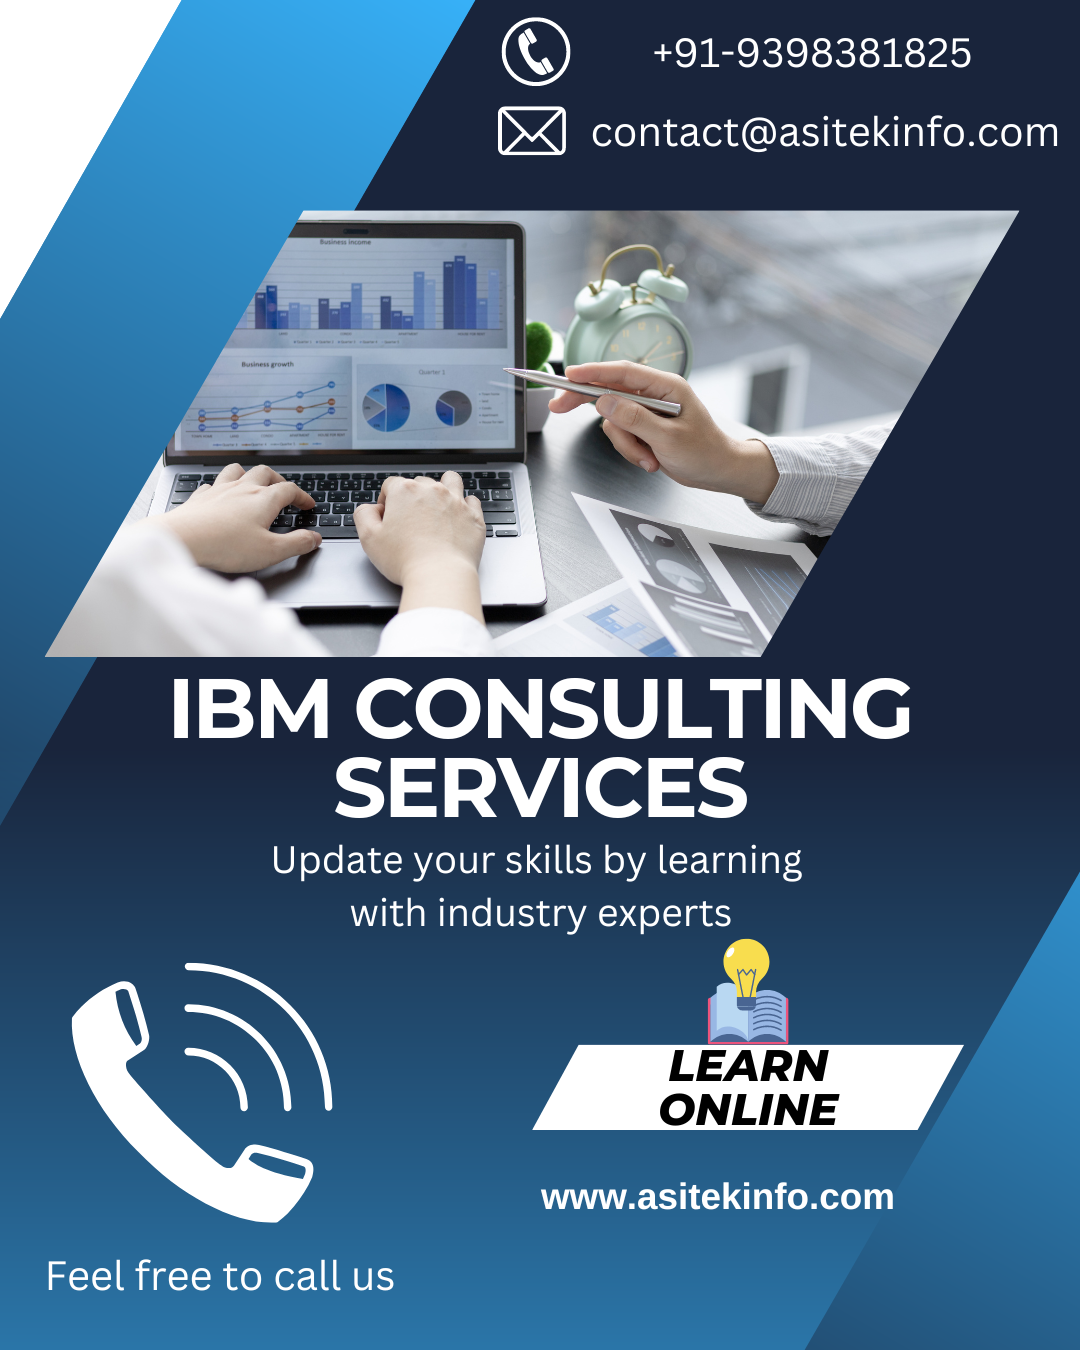 IBM Consulting Services-Learn Online